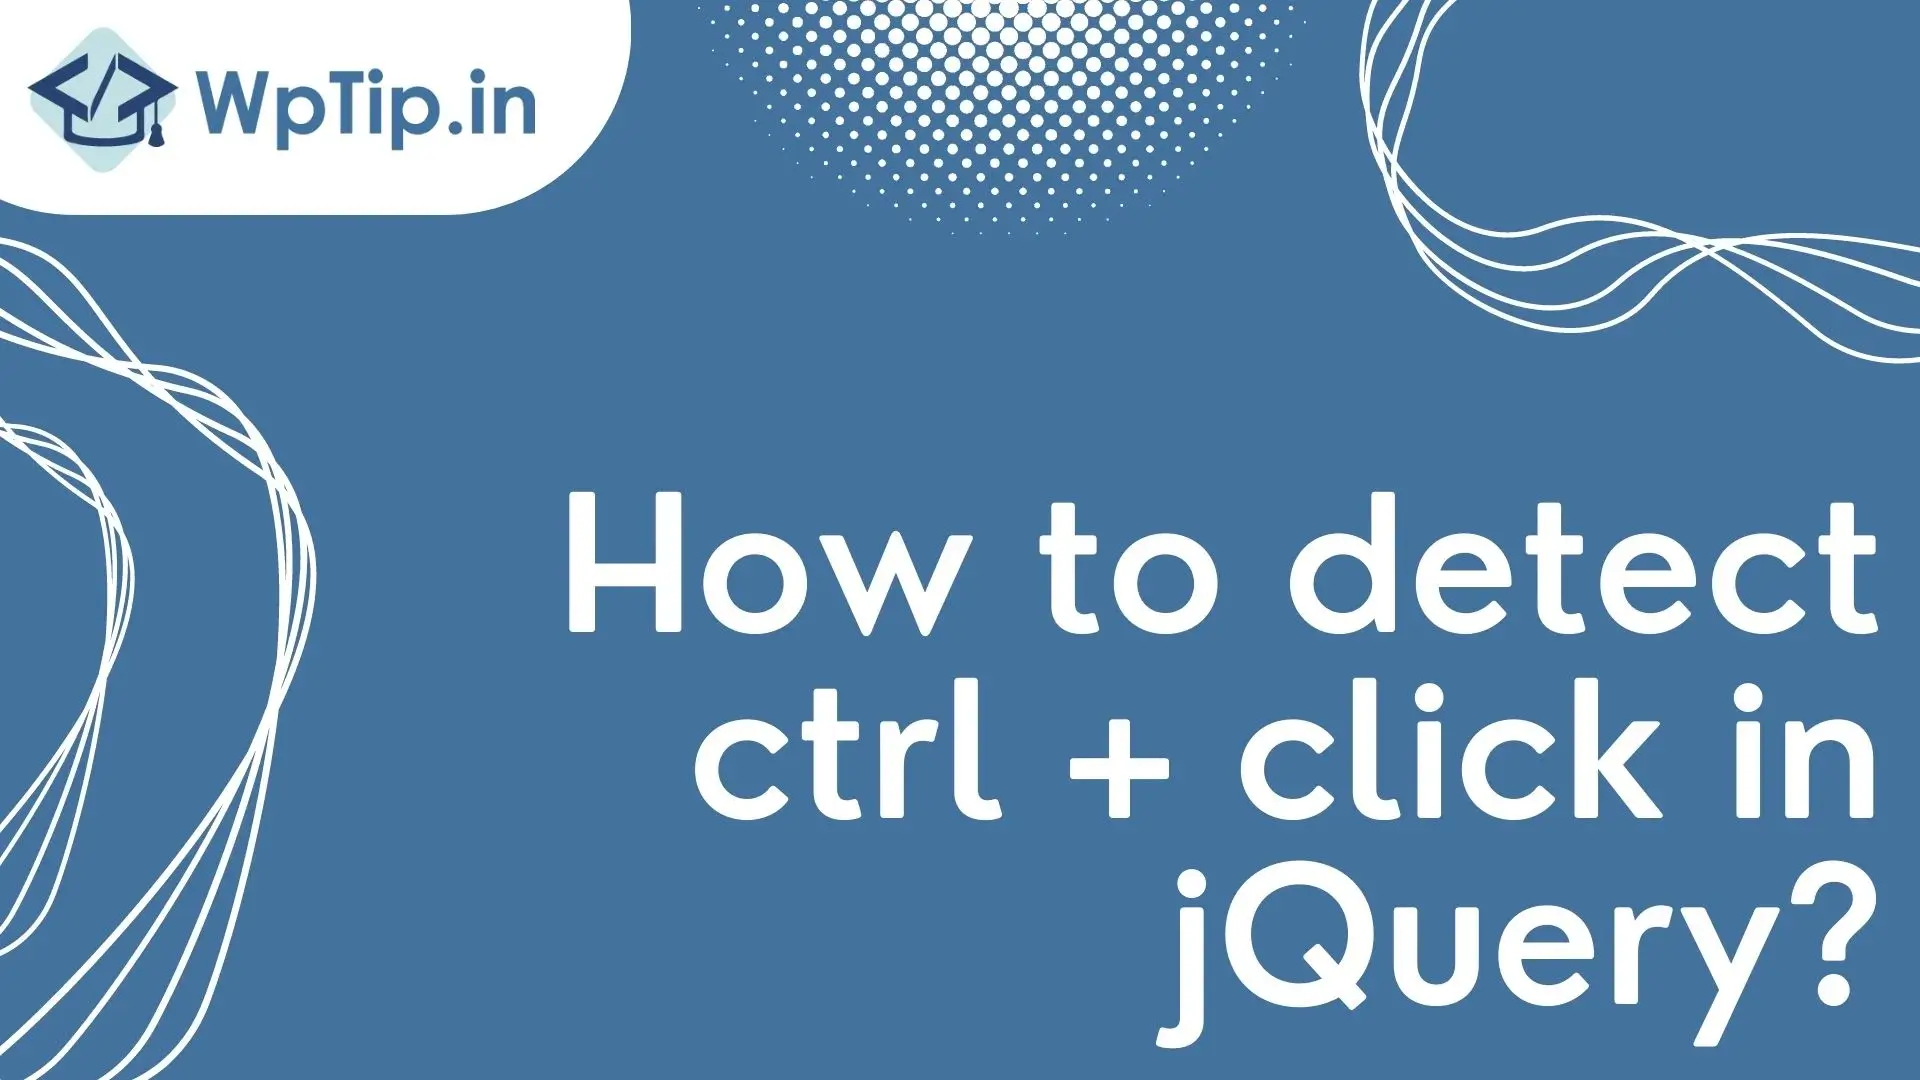 You are currently viewing How to detect ctrl + click in jQuery?